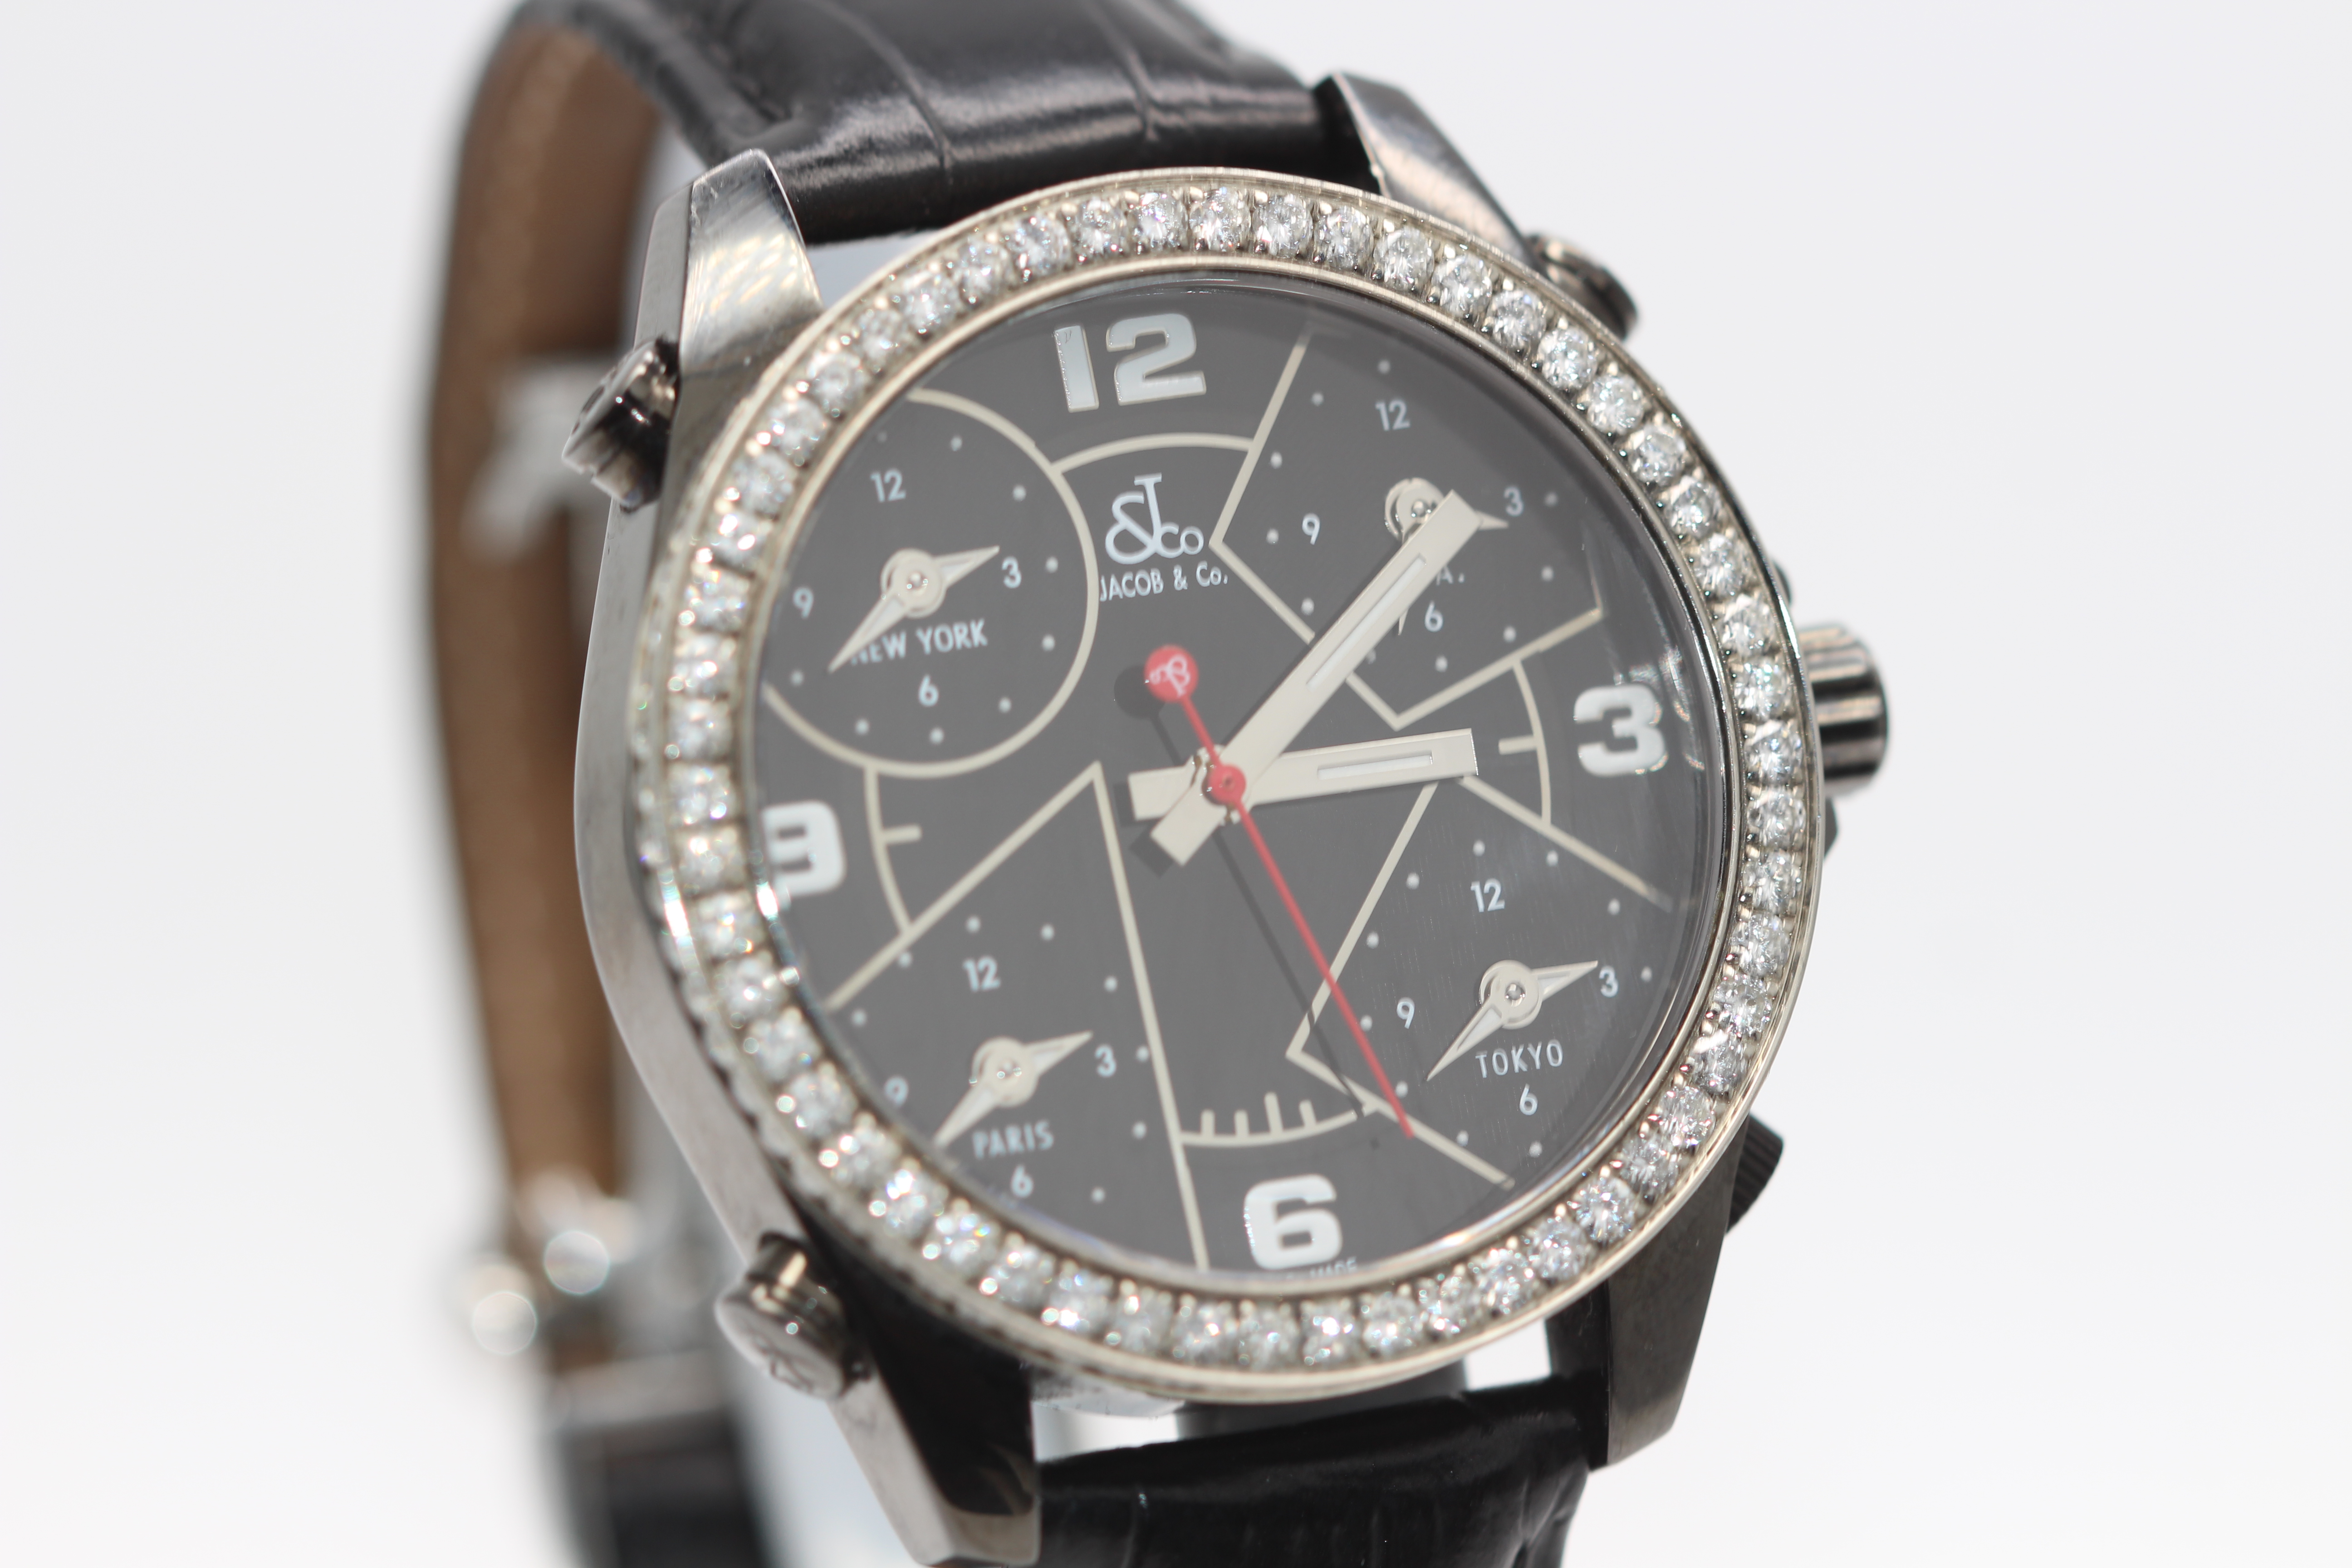 Jacob & Co Gents Watch, 5 world dial, PVD Black coated, Set with diamond bezel, Black leather - Image 2 of 7